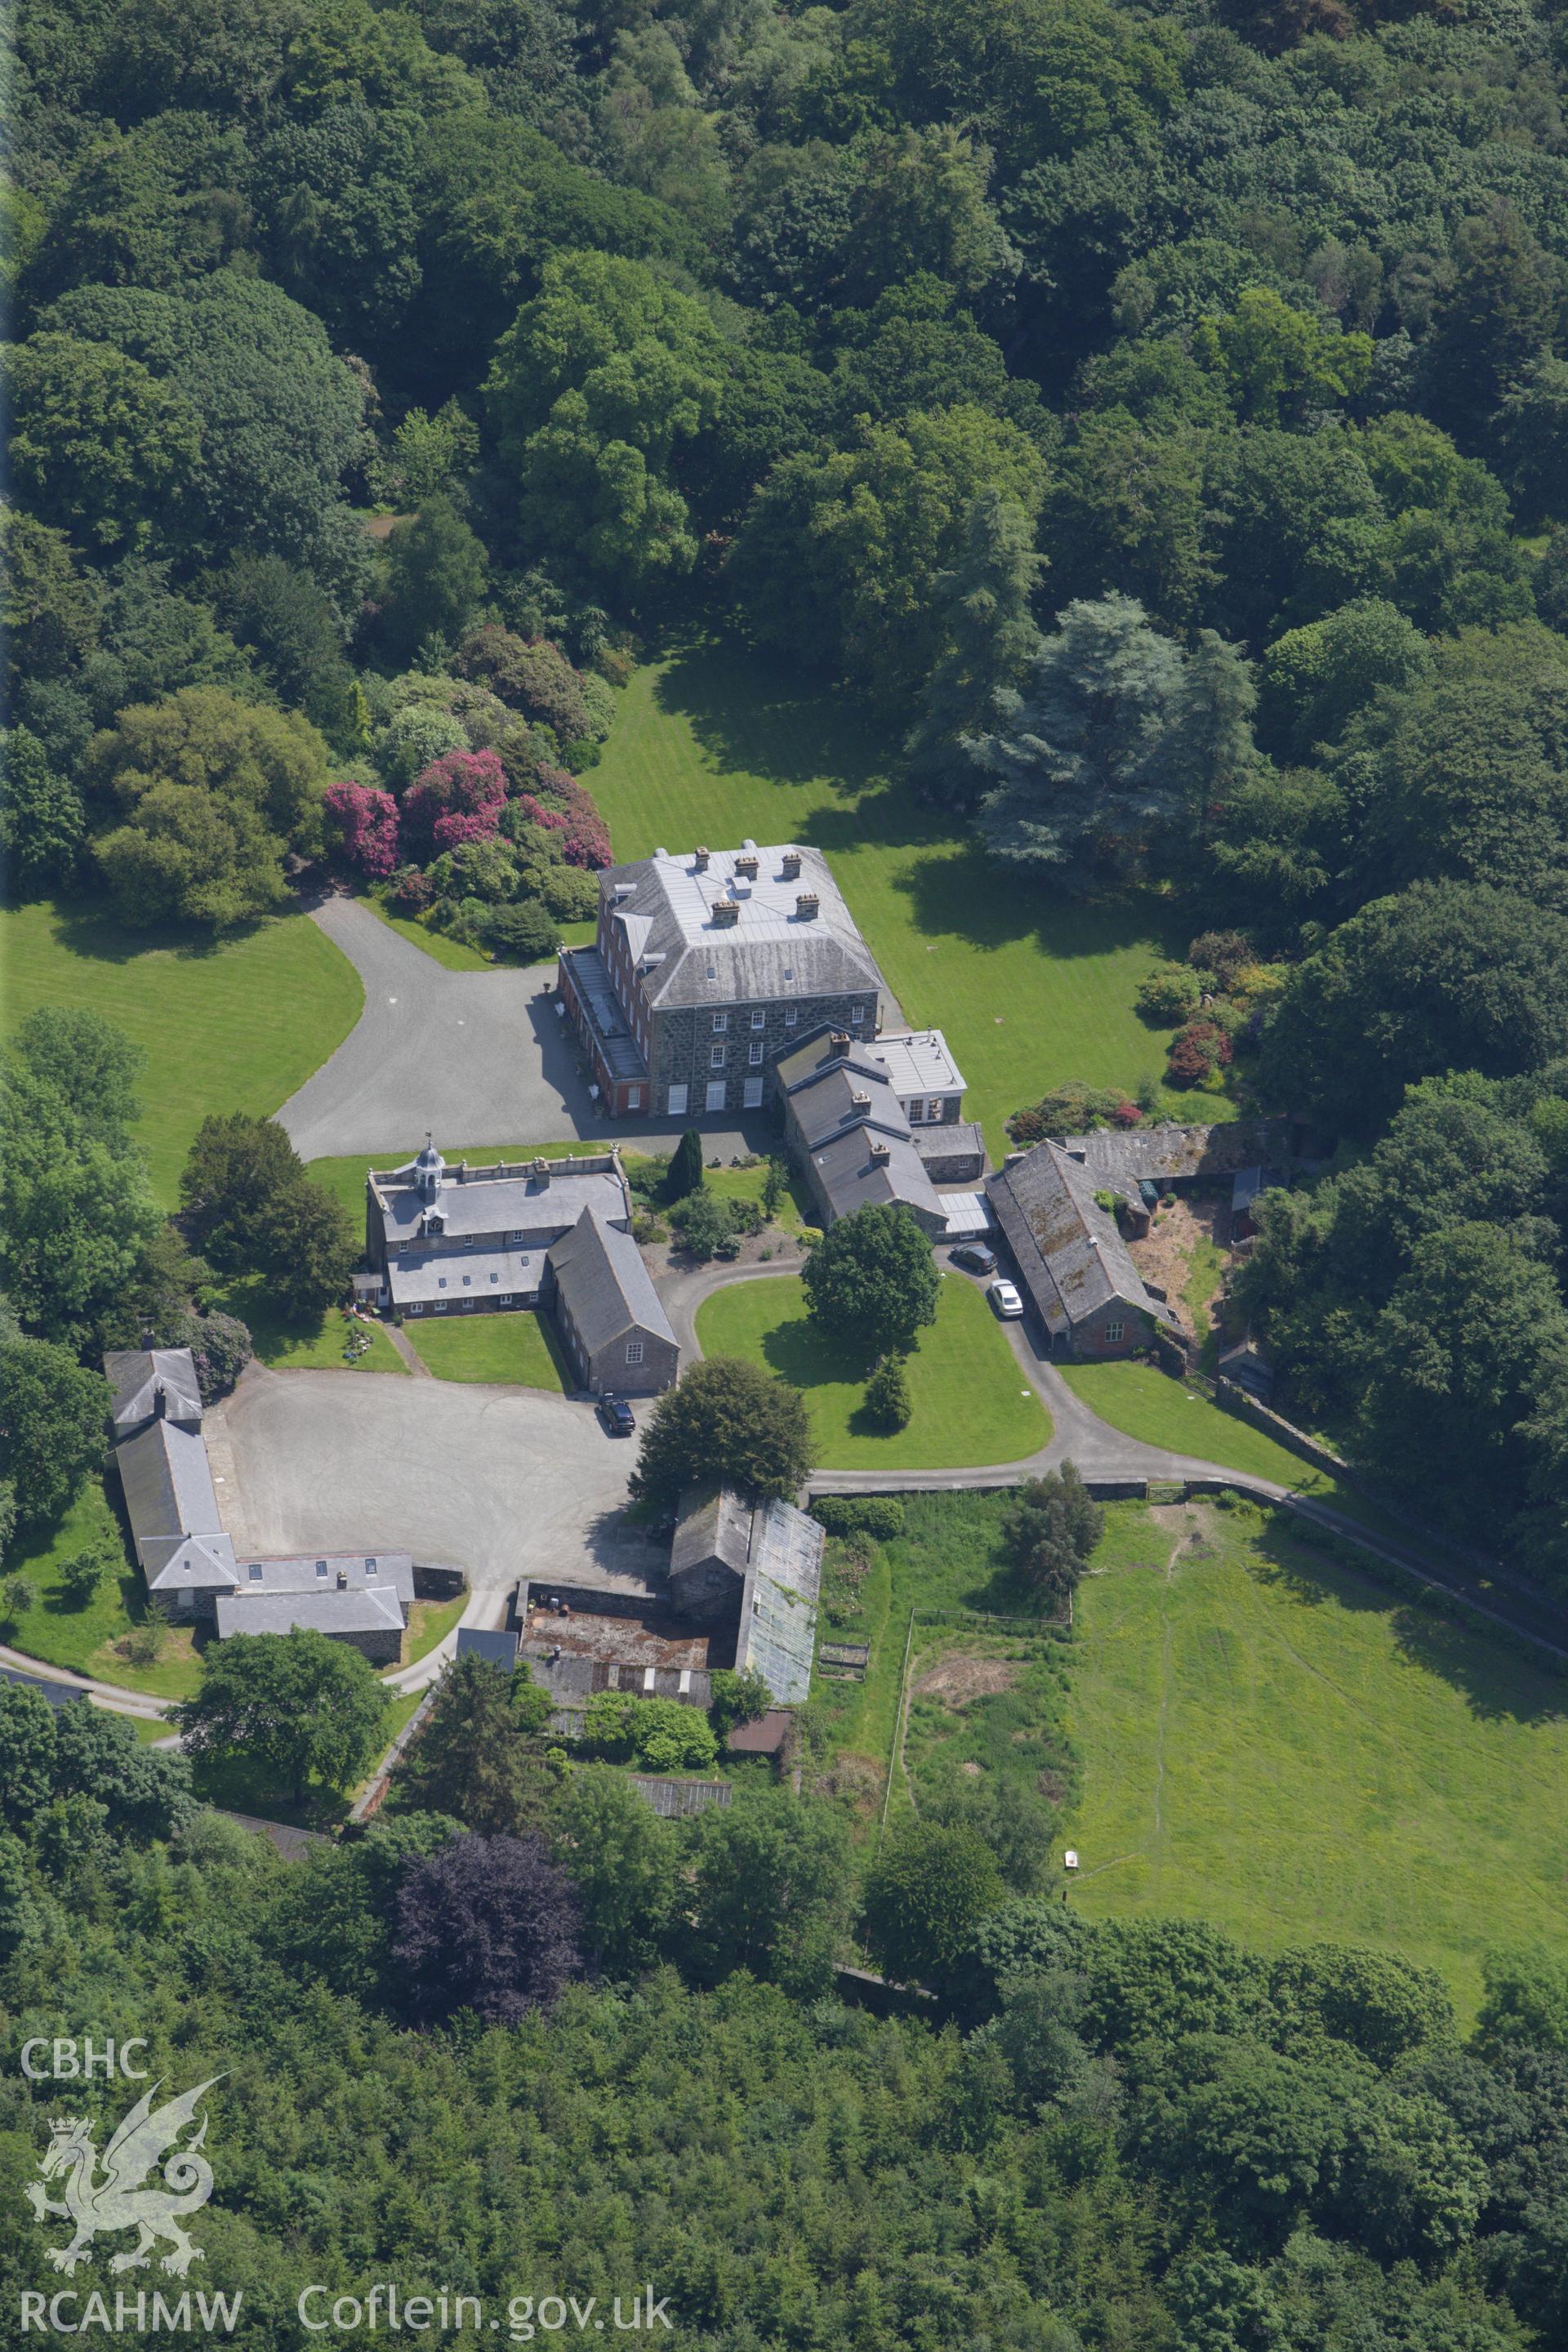 RCAHMW colour oblique aerial photograph of Peniarth Country House. Taken on 02 June 2009 by Toby Driver